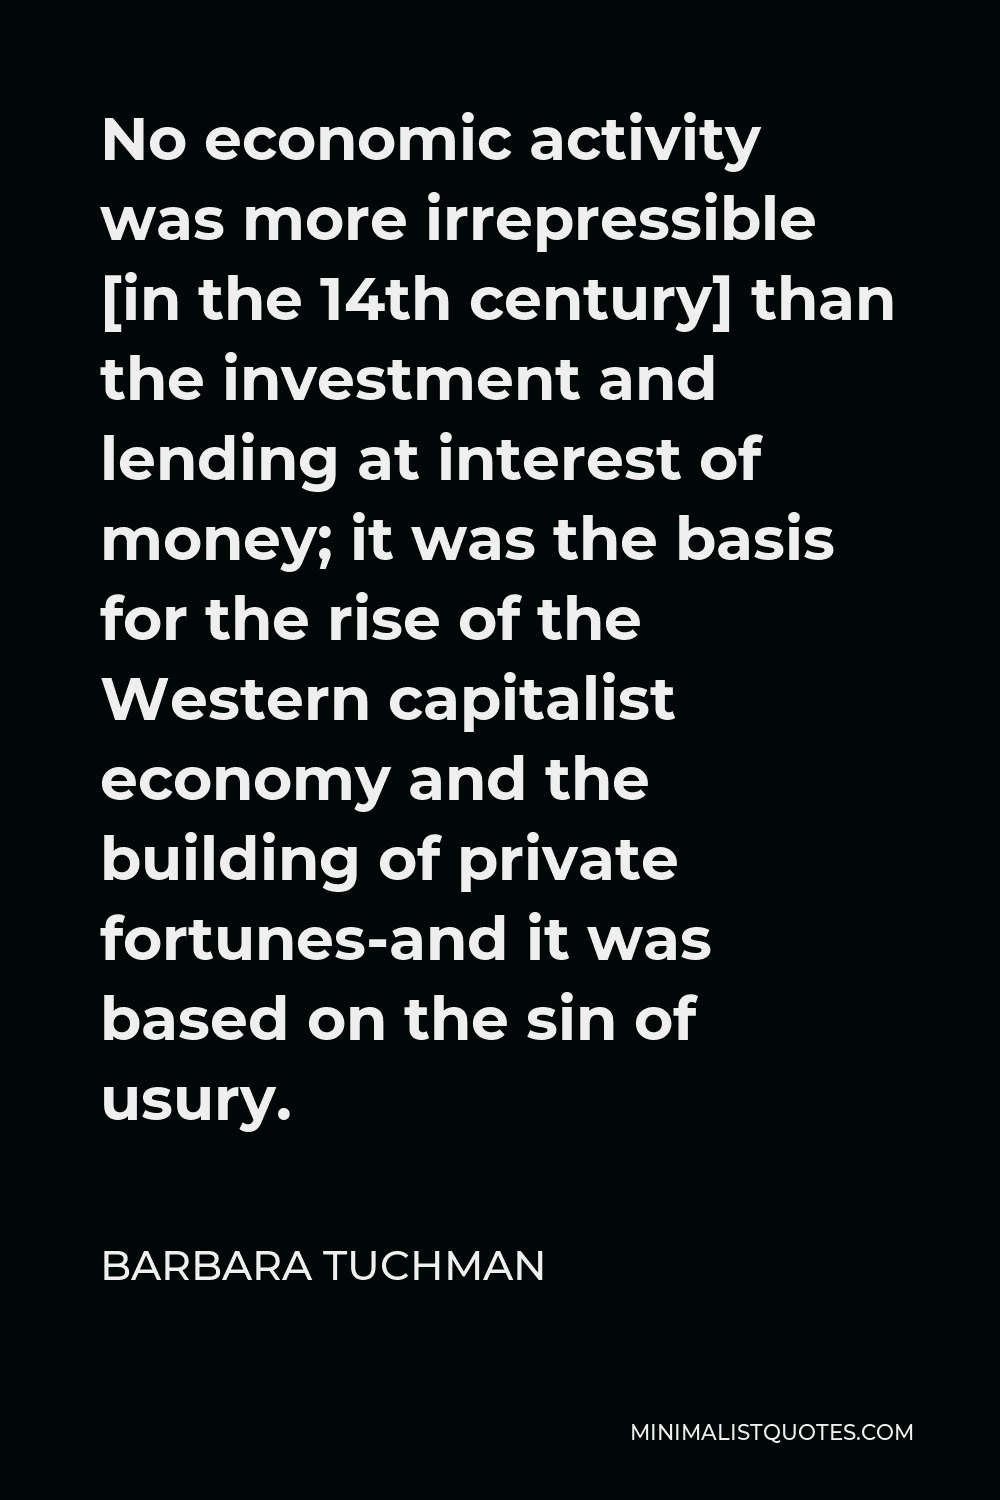 Barbara Tuchman Quote - No economic activity was more irrepressible [in the 14th century] than the investment and lending at interest of money; it was the basis for the rise of the Western capitalist economy and the building of private fortunes-and it was based on the sin of usury.